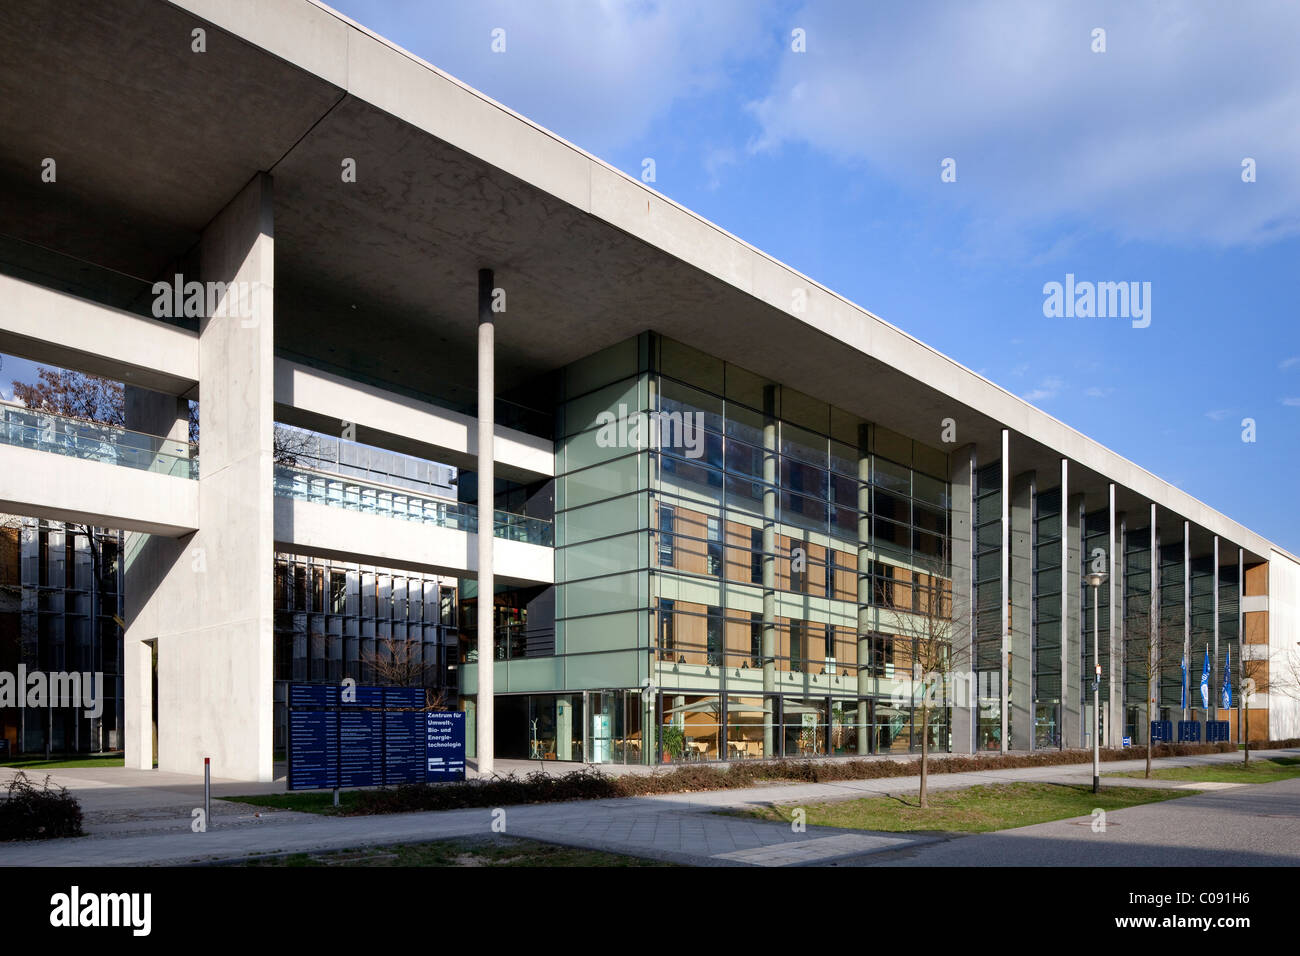 Centre for Environmental, Bio-, and Energy Technology, Adlershof Science City, Berlin, Germany, Europe Stock Photo